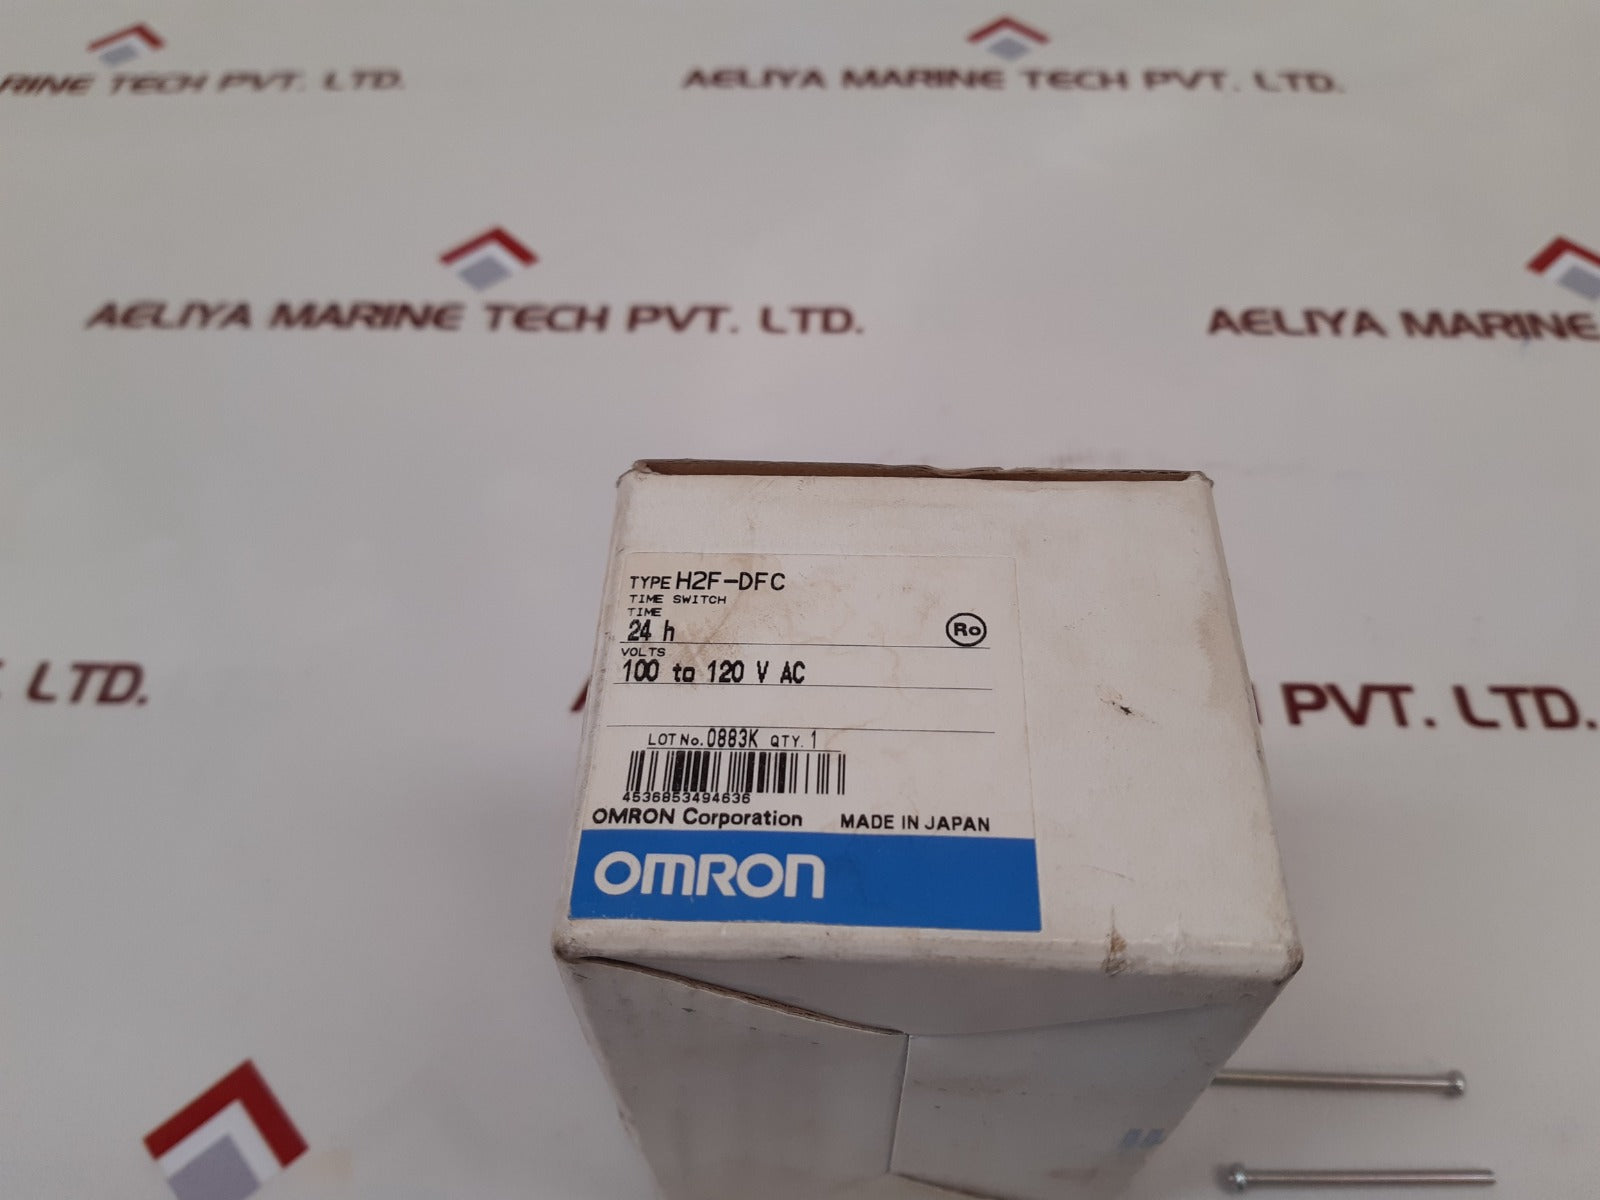 Omron H2F-d/-df Motor Timer H2F-dfc